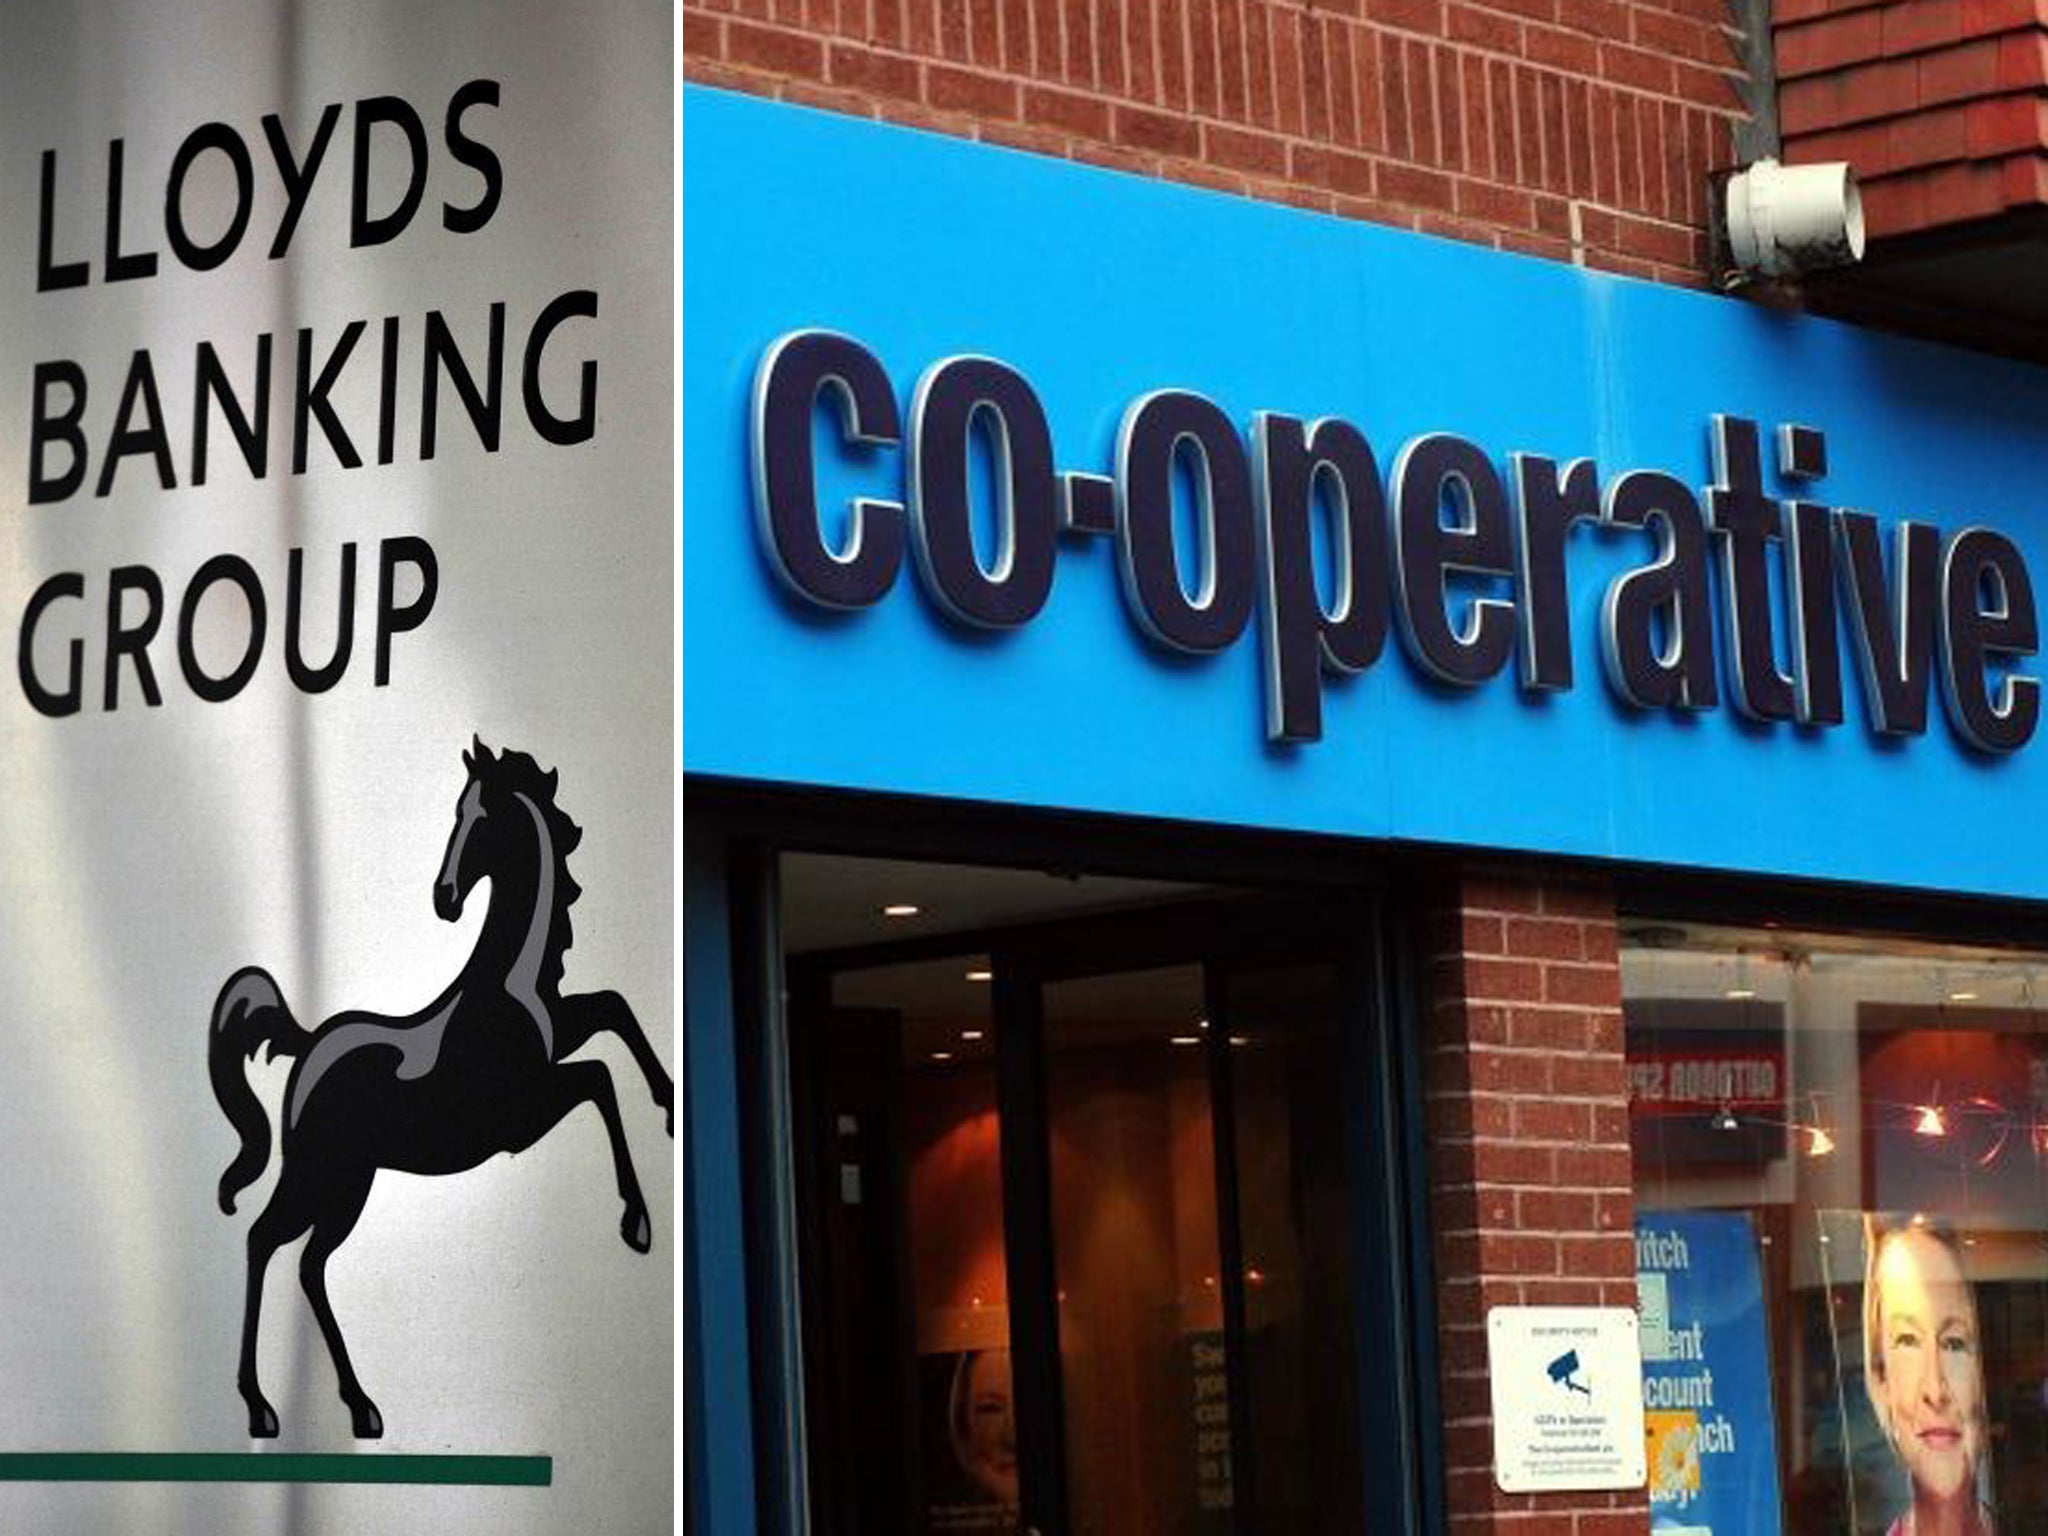 The Co-op said the deal to buy over 600 Lloyds branches was not in its members' best interests